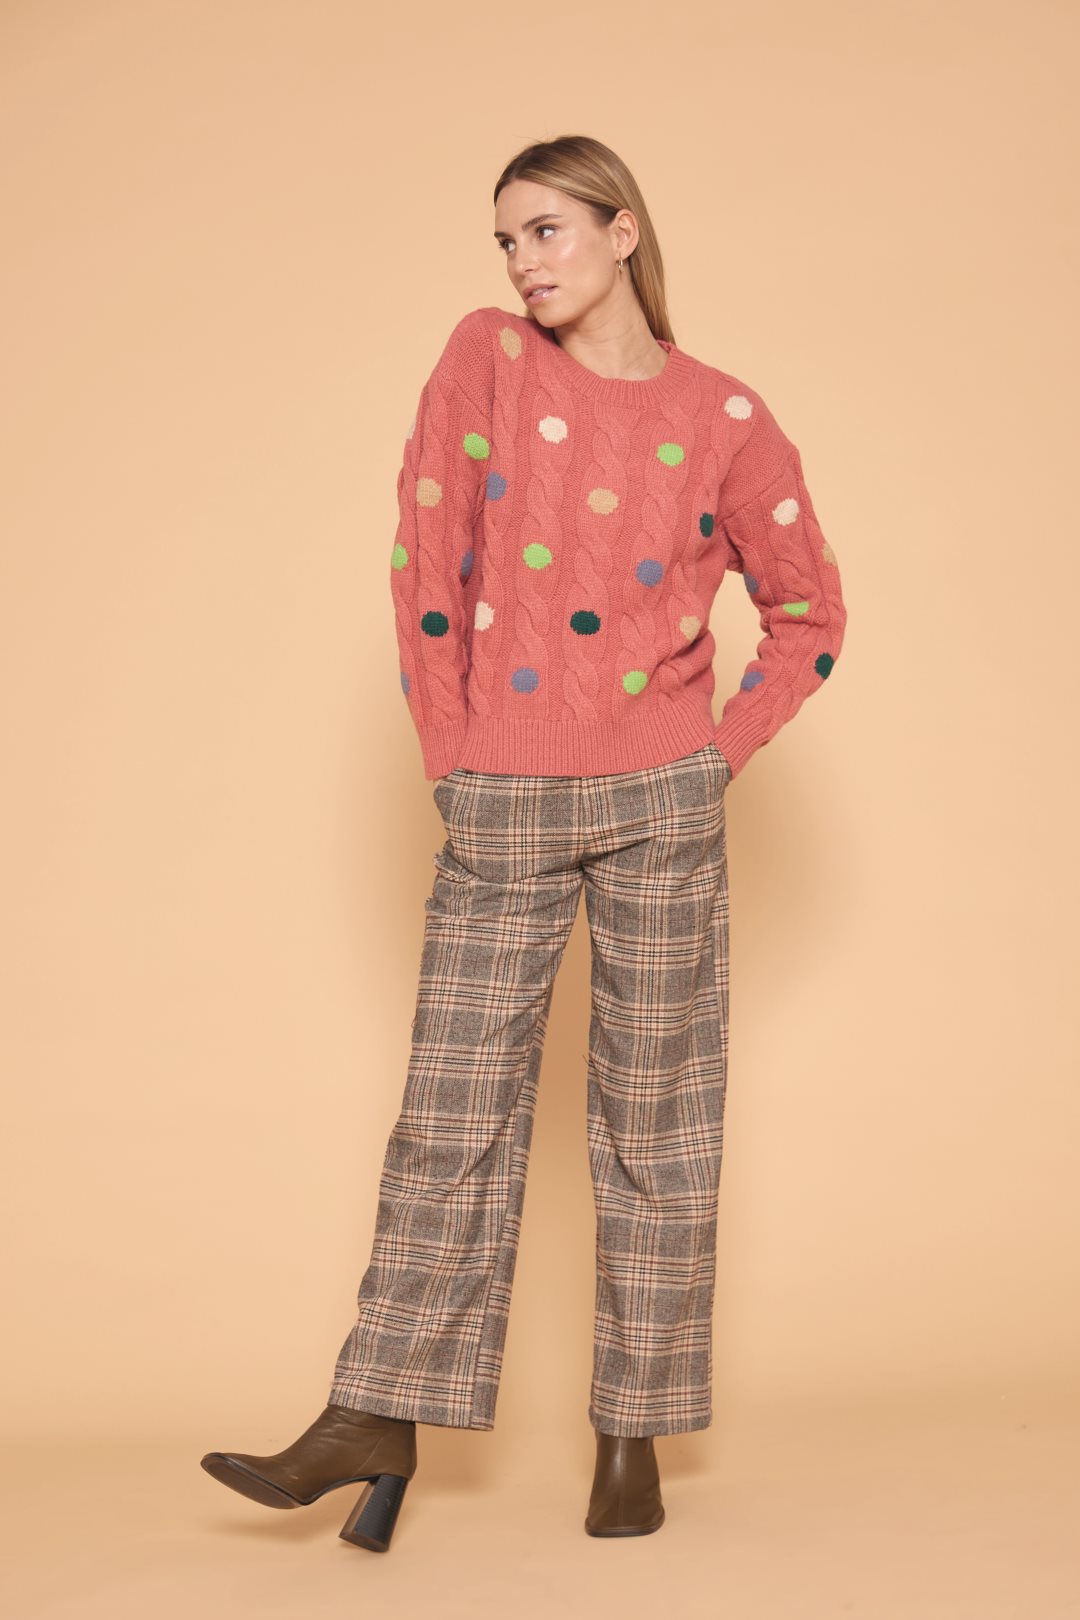 Sweater with polka dot